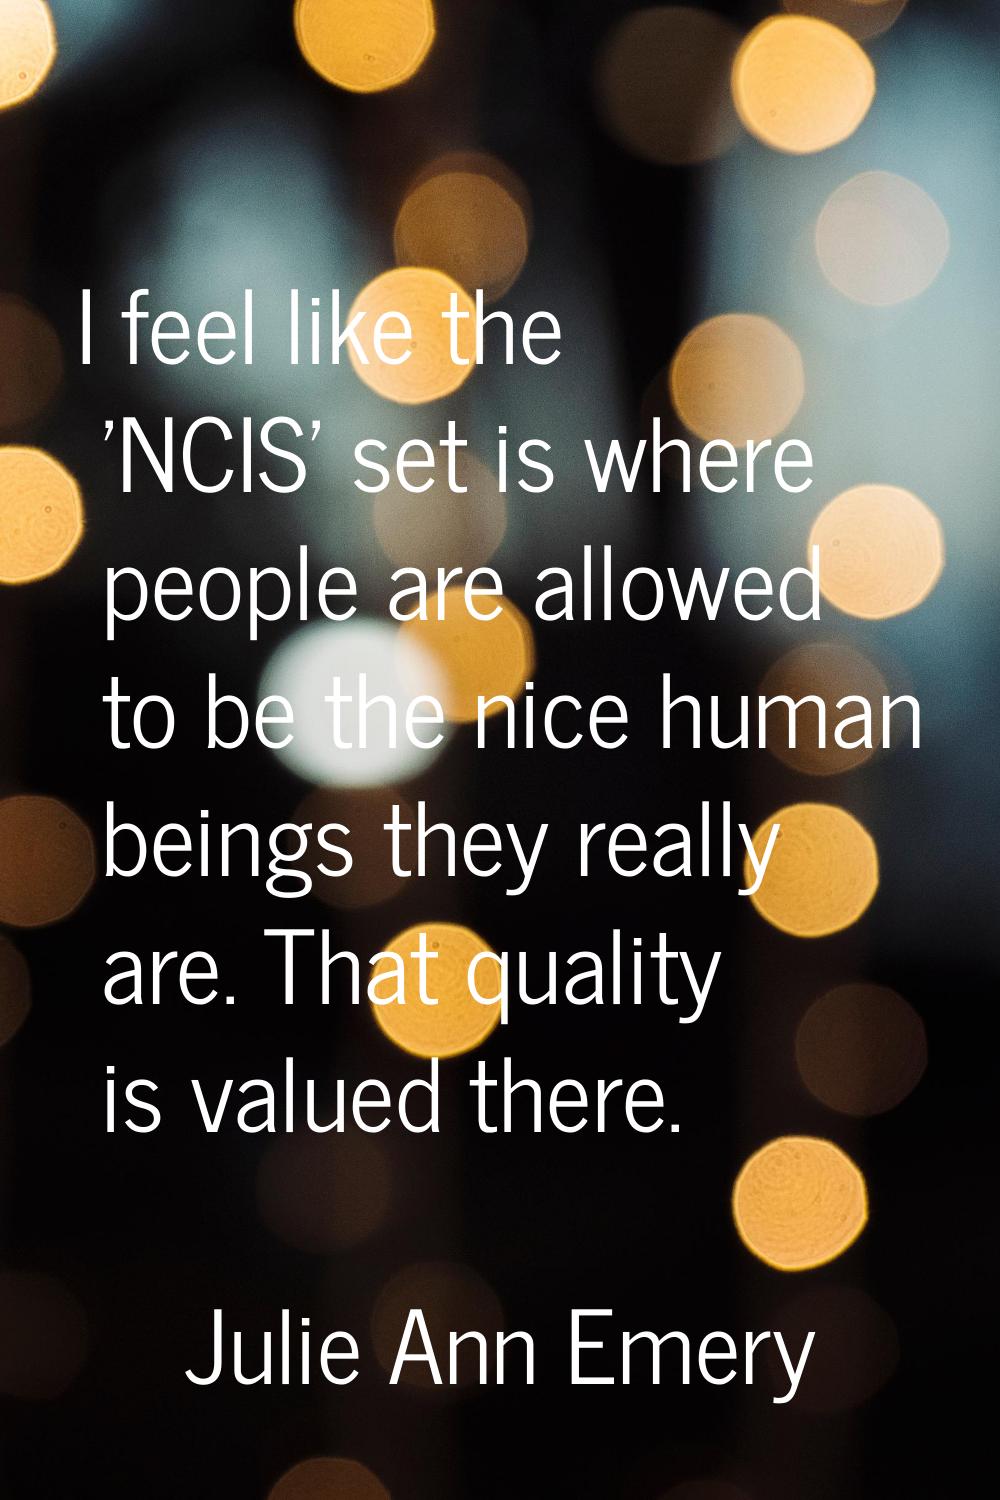 I feel like the 'NCIS' set is where people are allowed to be the nice human beings they really are.